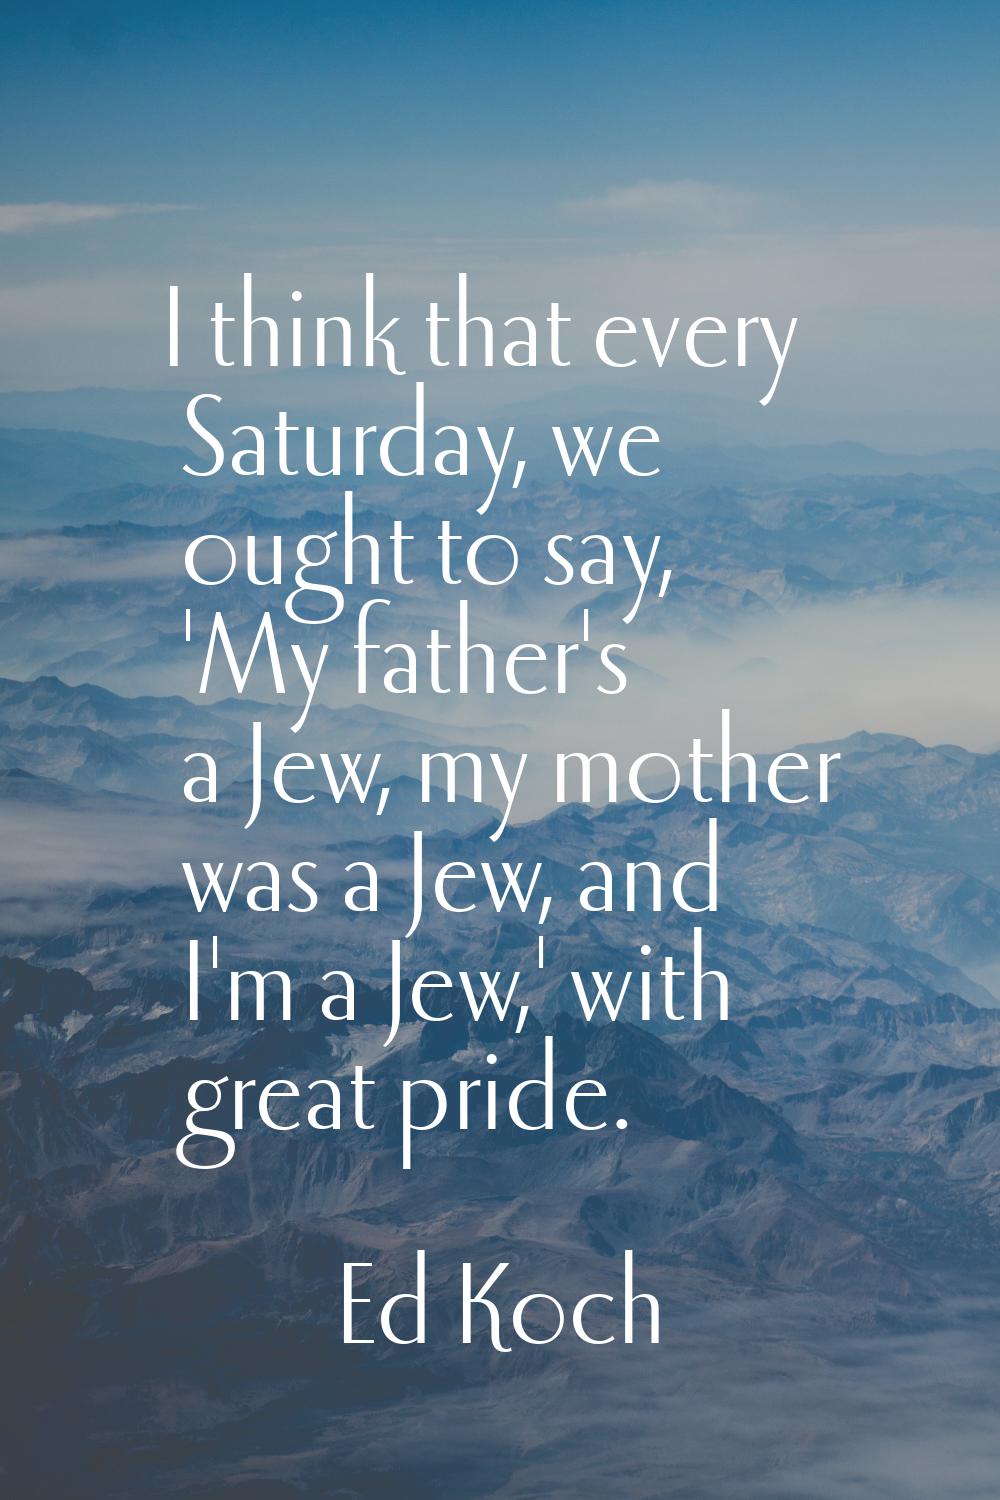 I think that every Saturday, we ought to say, 'My father's a Jew, my mother was a Jew, and I'm a Je